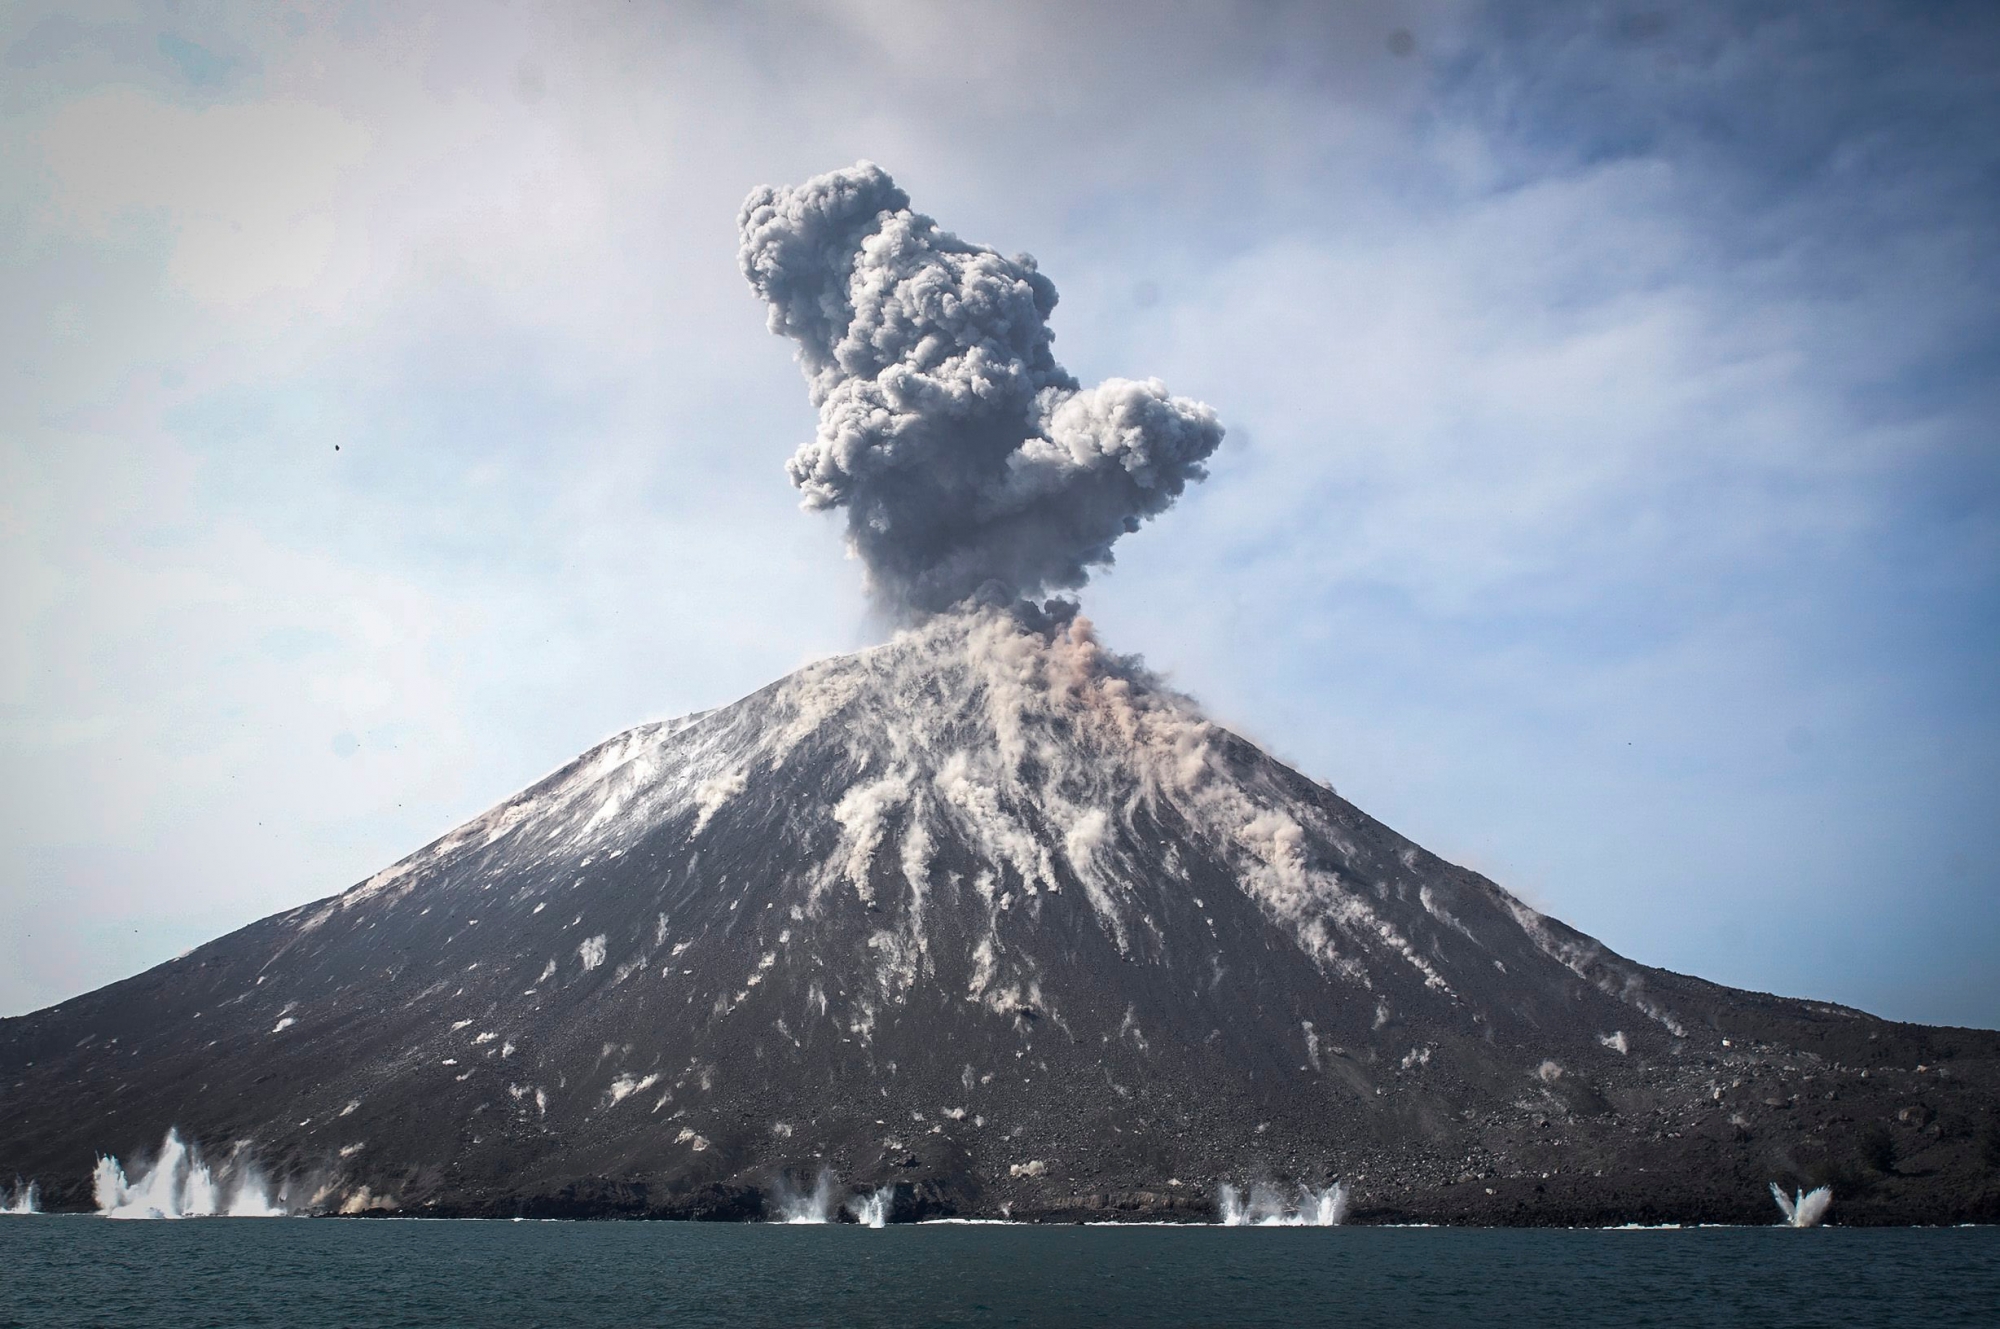 epa07246109 (FILE) - A plume of ash erupts from Mount Anak Krakatau volcano as seen from Rakata Island in Lampung province, Indonesia, 18 July 2018 (reissued 23 December 2018). A tsunami that hit coastal areas around Indonesia's Sunda Straight has killed at least 43 people and injured over 580 others. Local authorities believe the tsunami may have been caused by volcanic activity related to Anak Krakatau.  EPA/GHAZALI (FILE) INDONESIA KRAKATOA